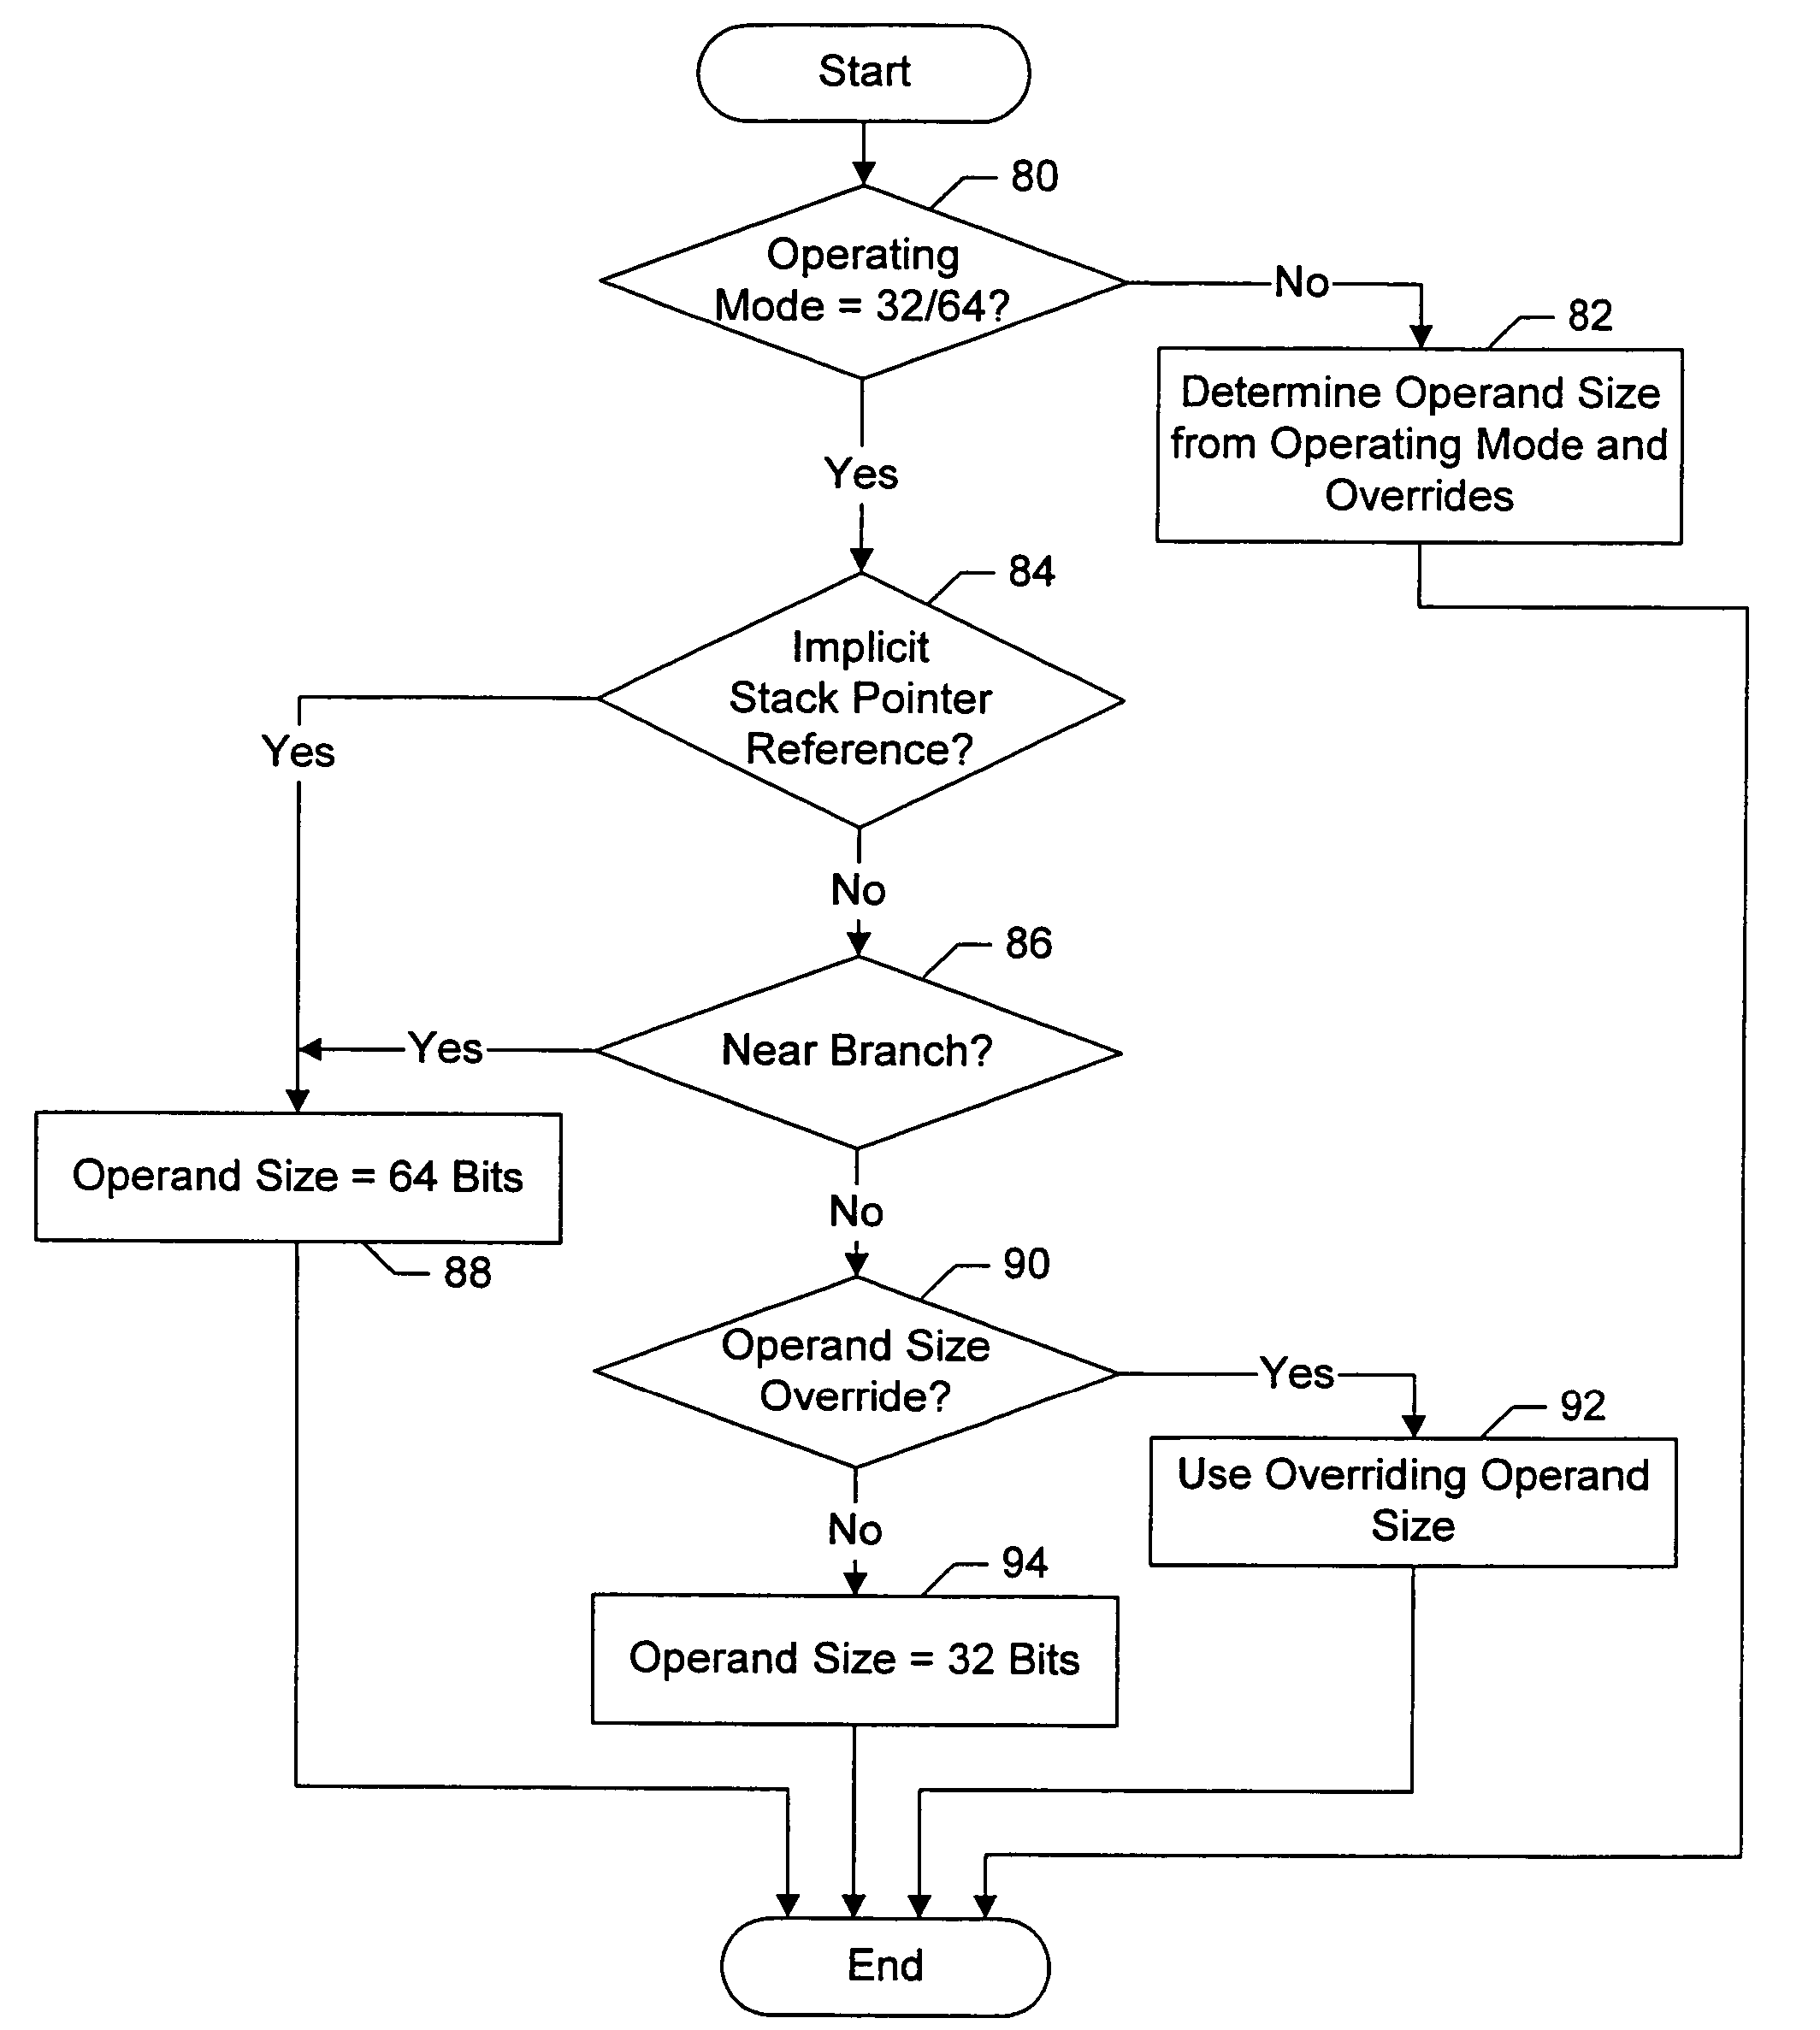 Processor which overrides default operand size for implicit stack pointer references and near branches